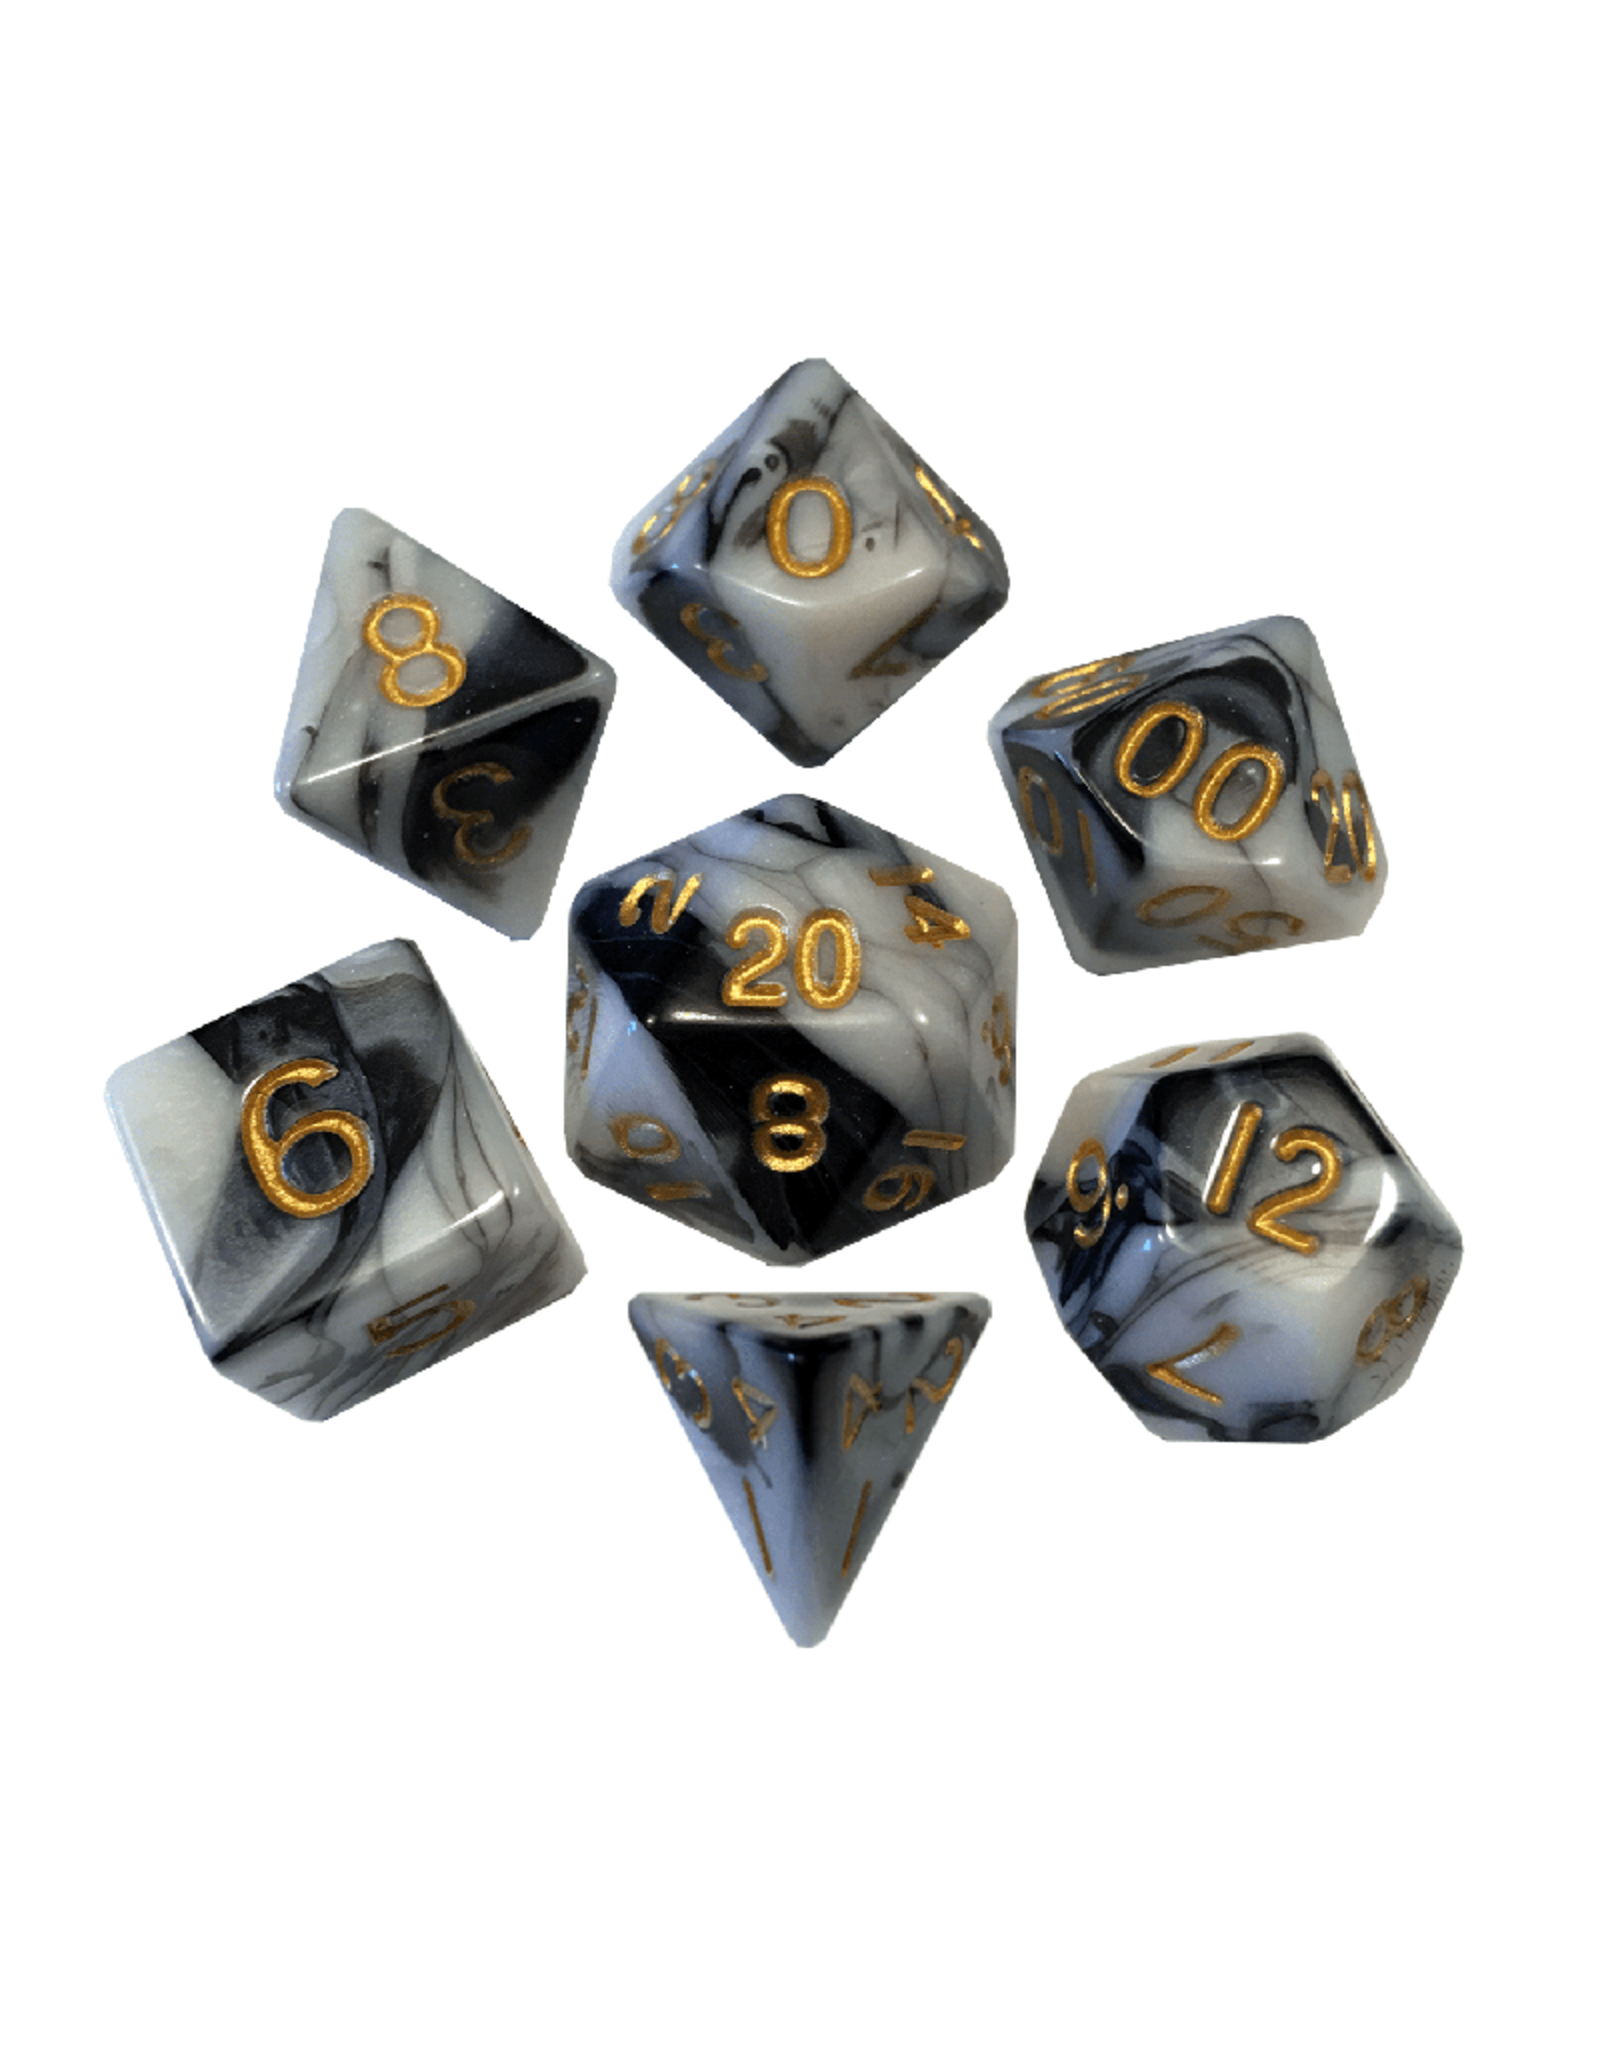 Polyhedral Dice Set: Marble - Gold